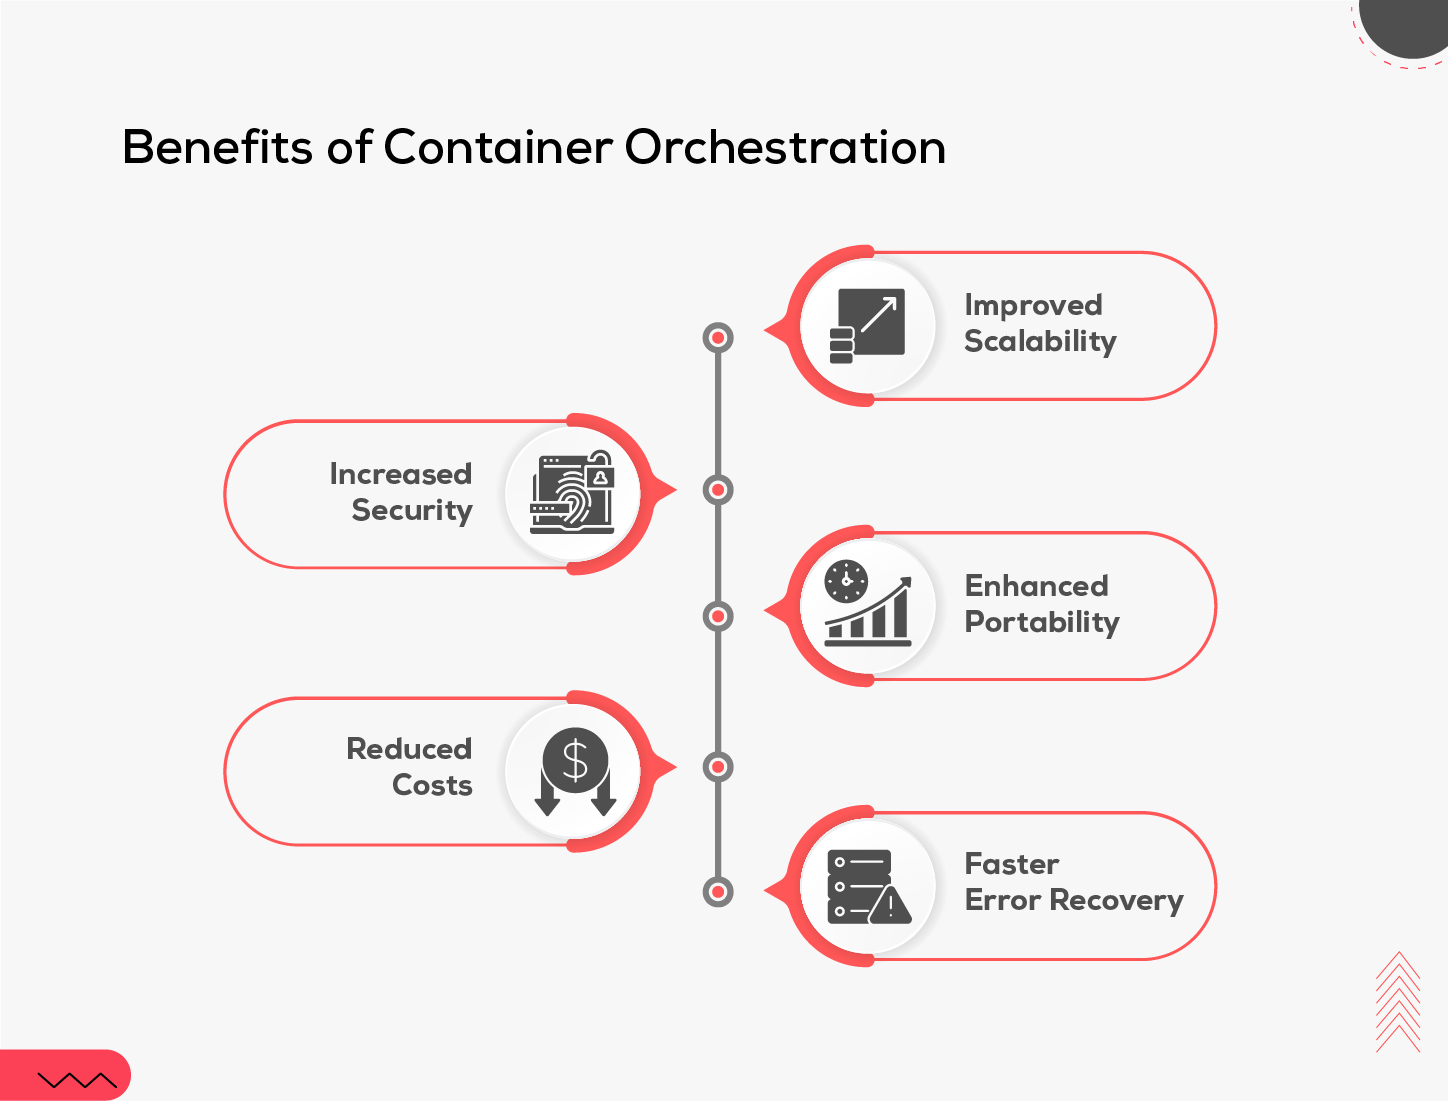 Benefits of Container Orchestration